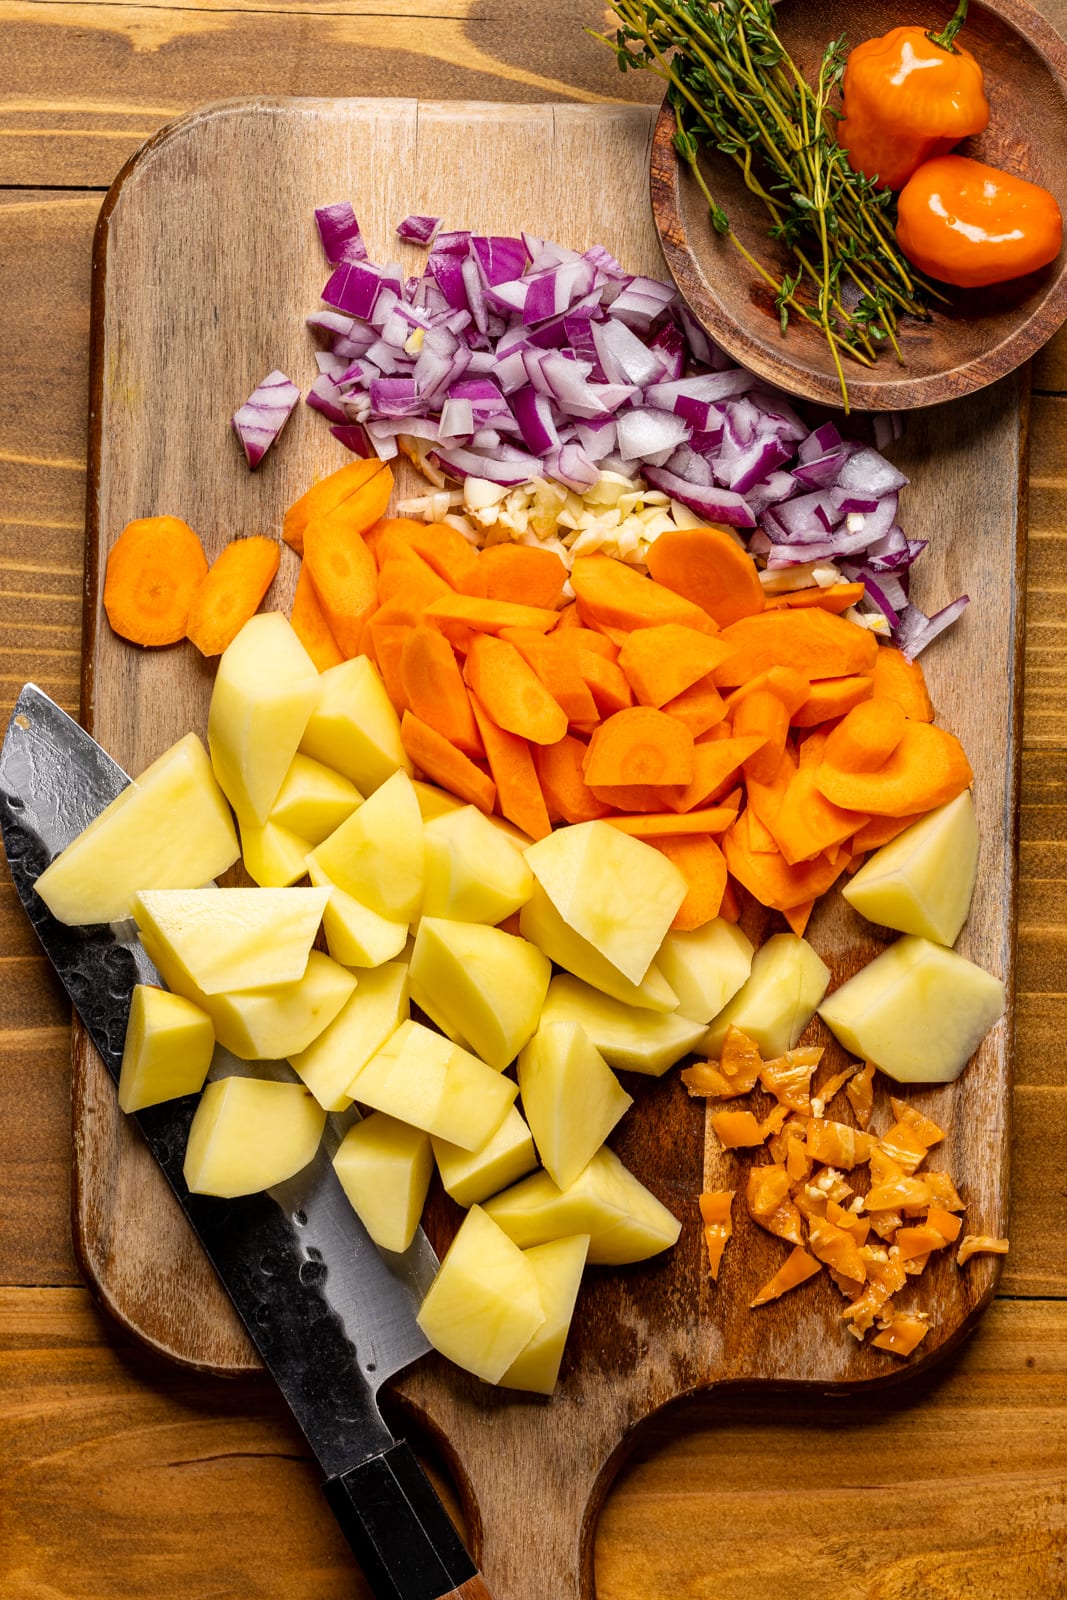 Ingredients on a brown wood cutting board including chopped carrots, potatoes, onions, scotch bonnet, and thyme.